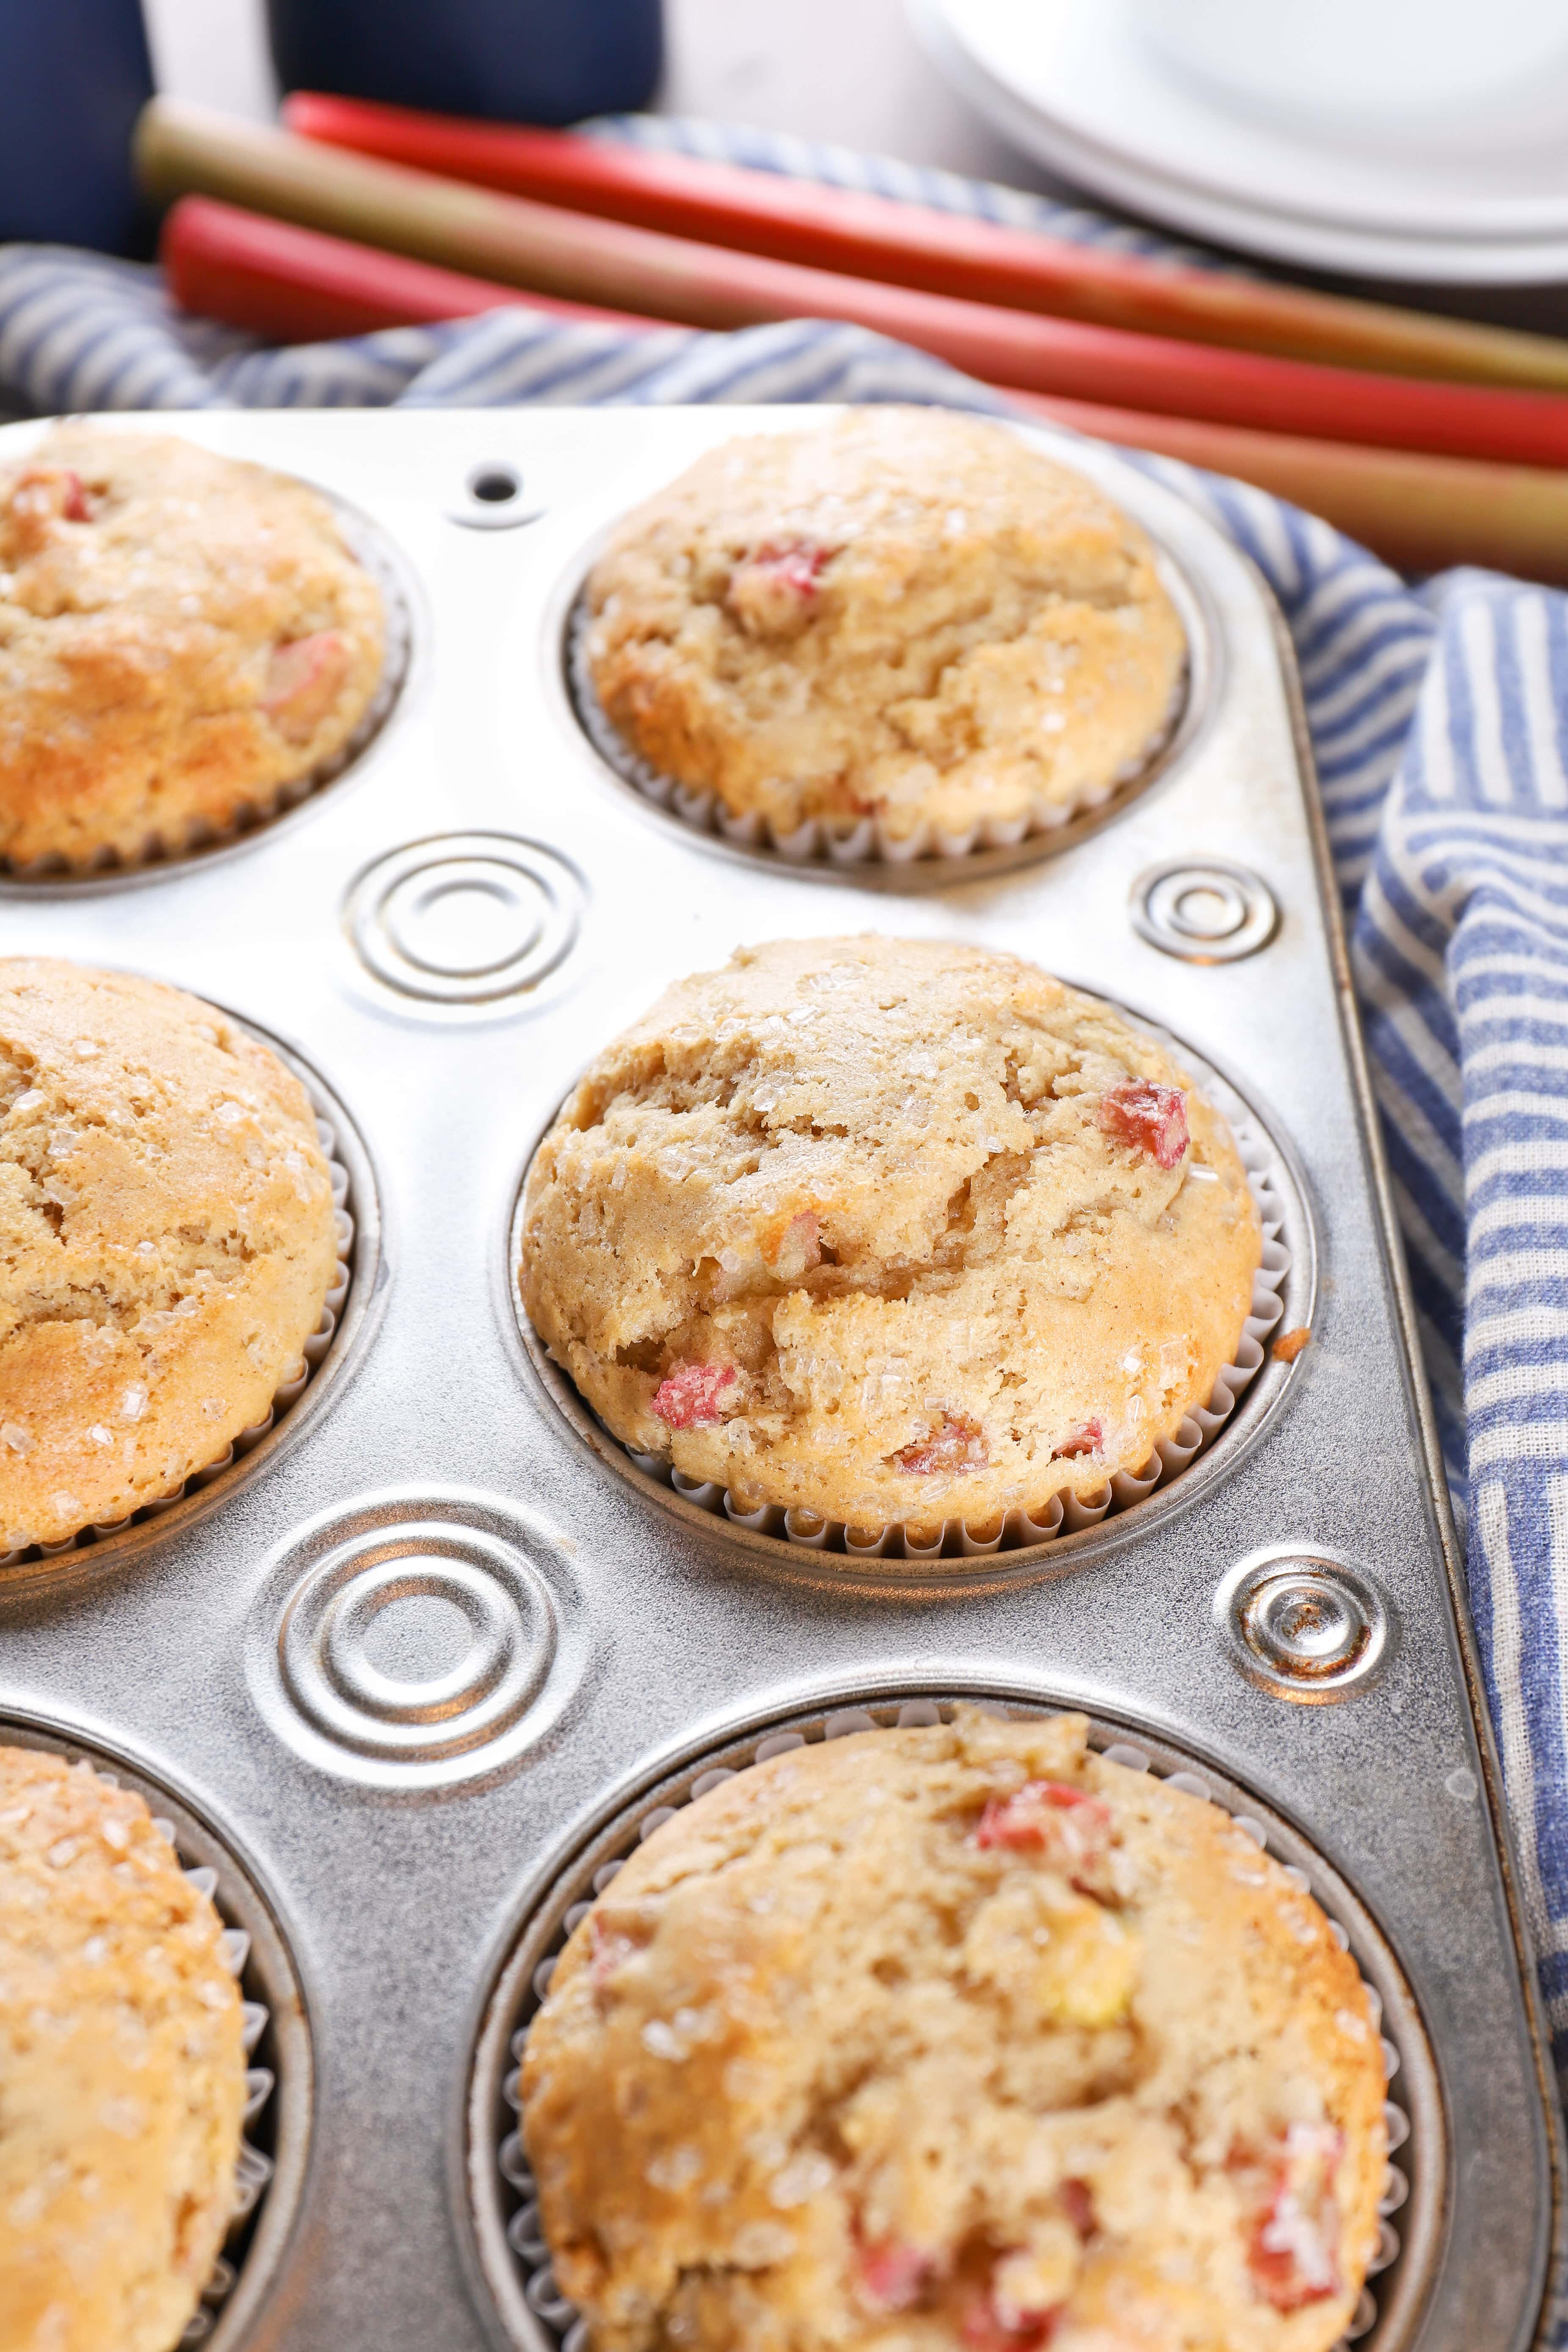 Muffin tin full of bakery style rhubarb muffins